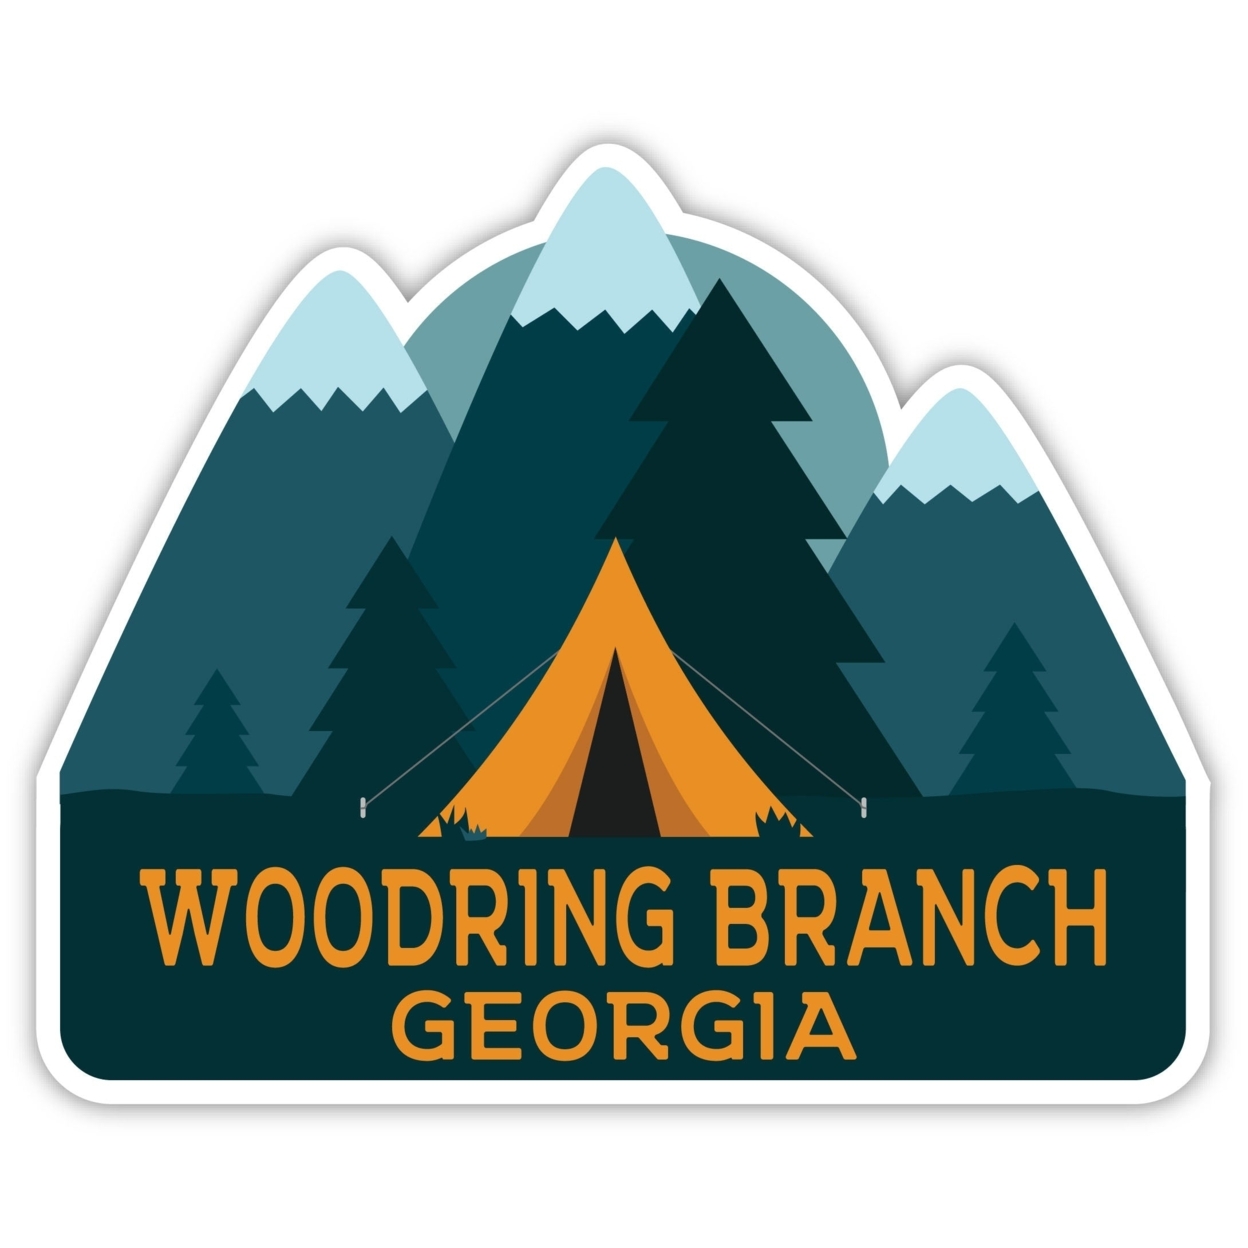 Woodring Branch Georgia Souvenir Decorative Stickers (Choose Theme And Size) - Single Unit, 2-Inch, Tent